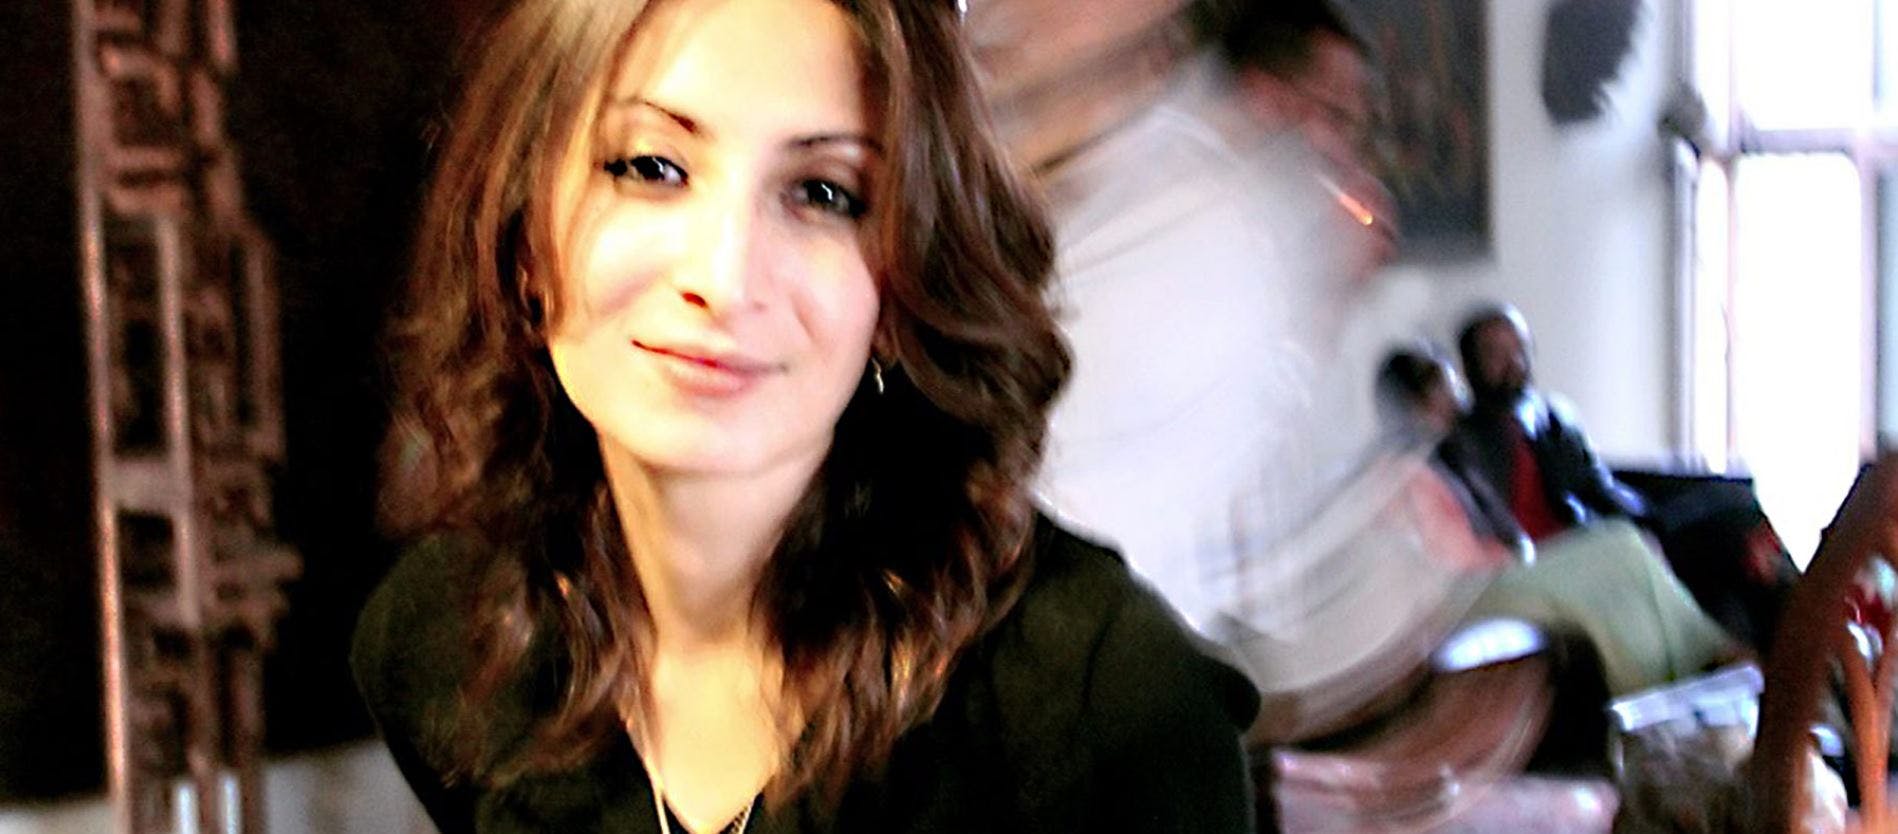  A portrait photograph of Zarmeene Shah. She has a long brown hair and is wearing a black shirt. She smiles directly at the camera. 